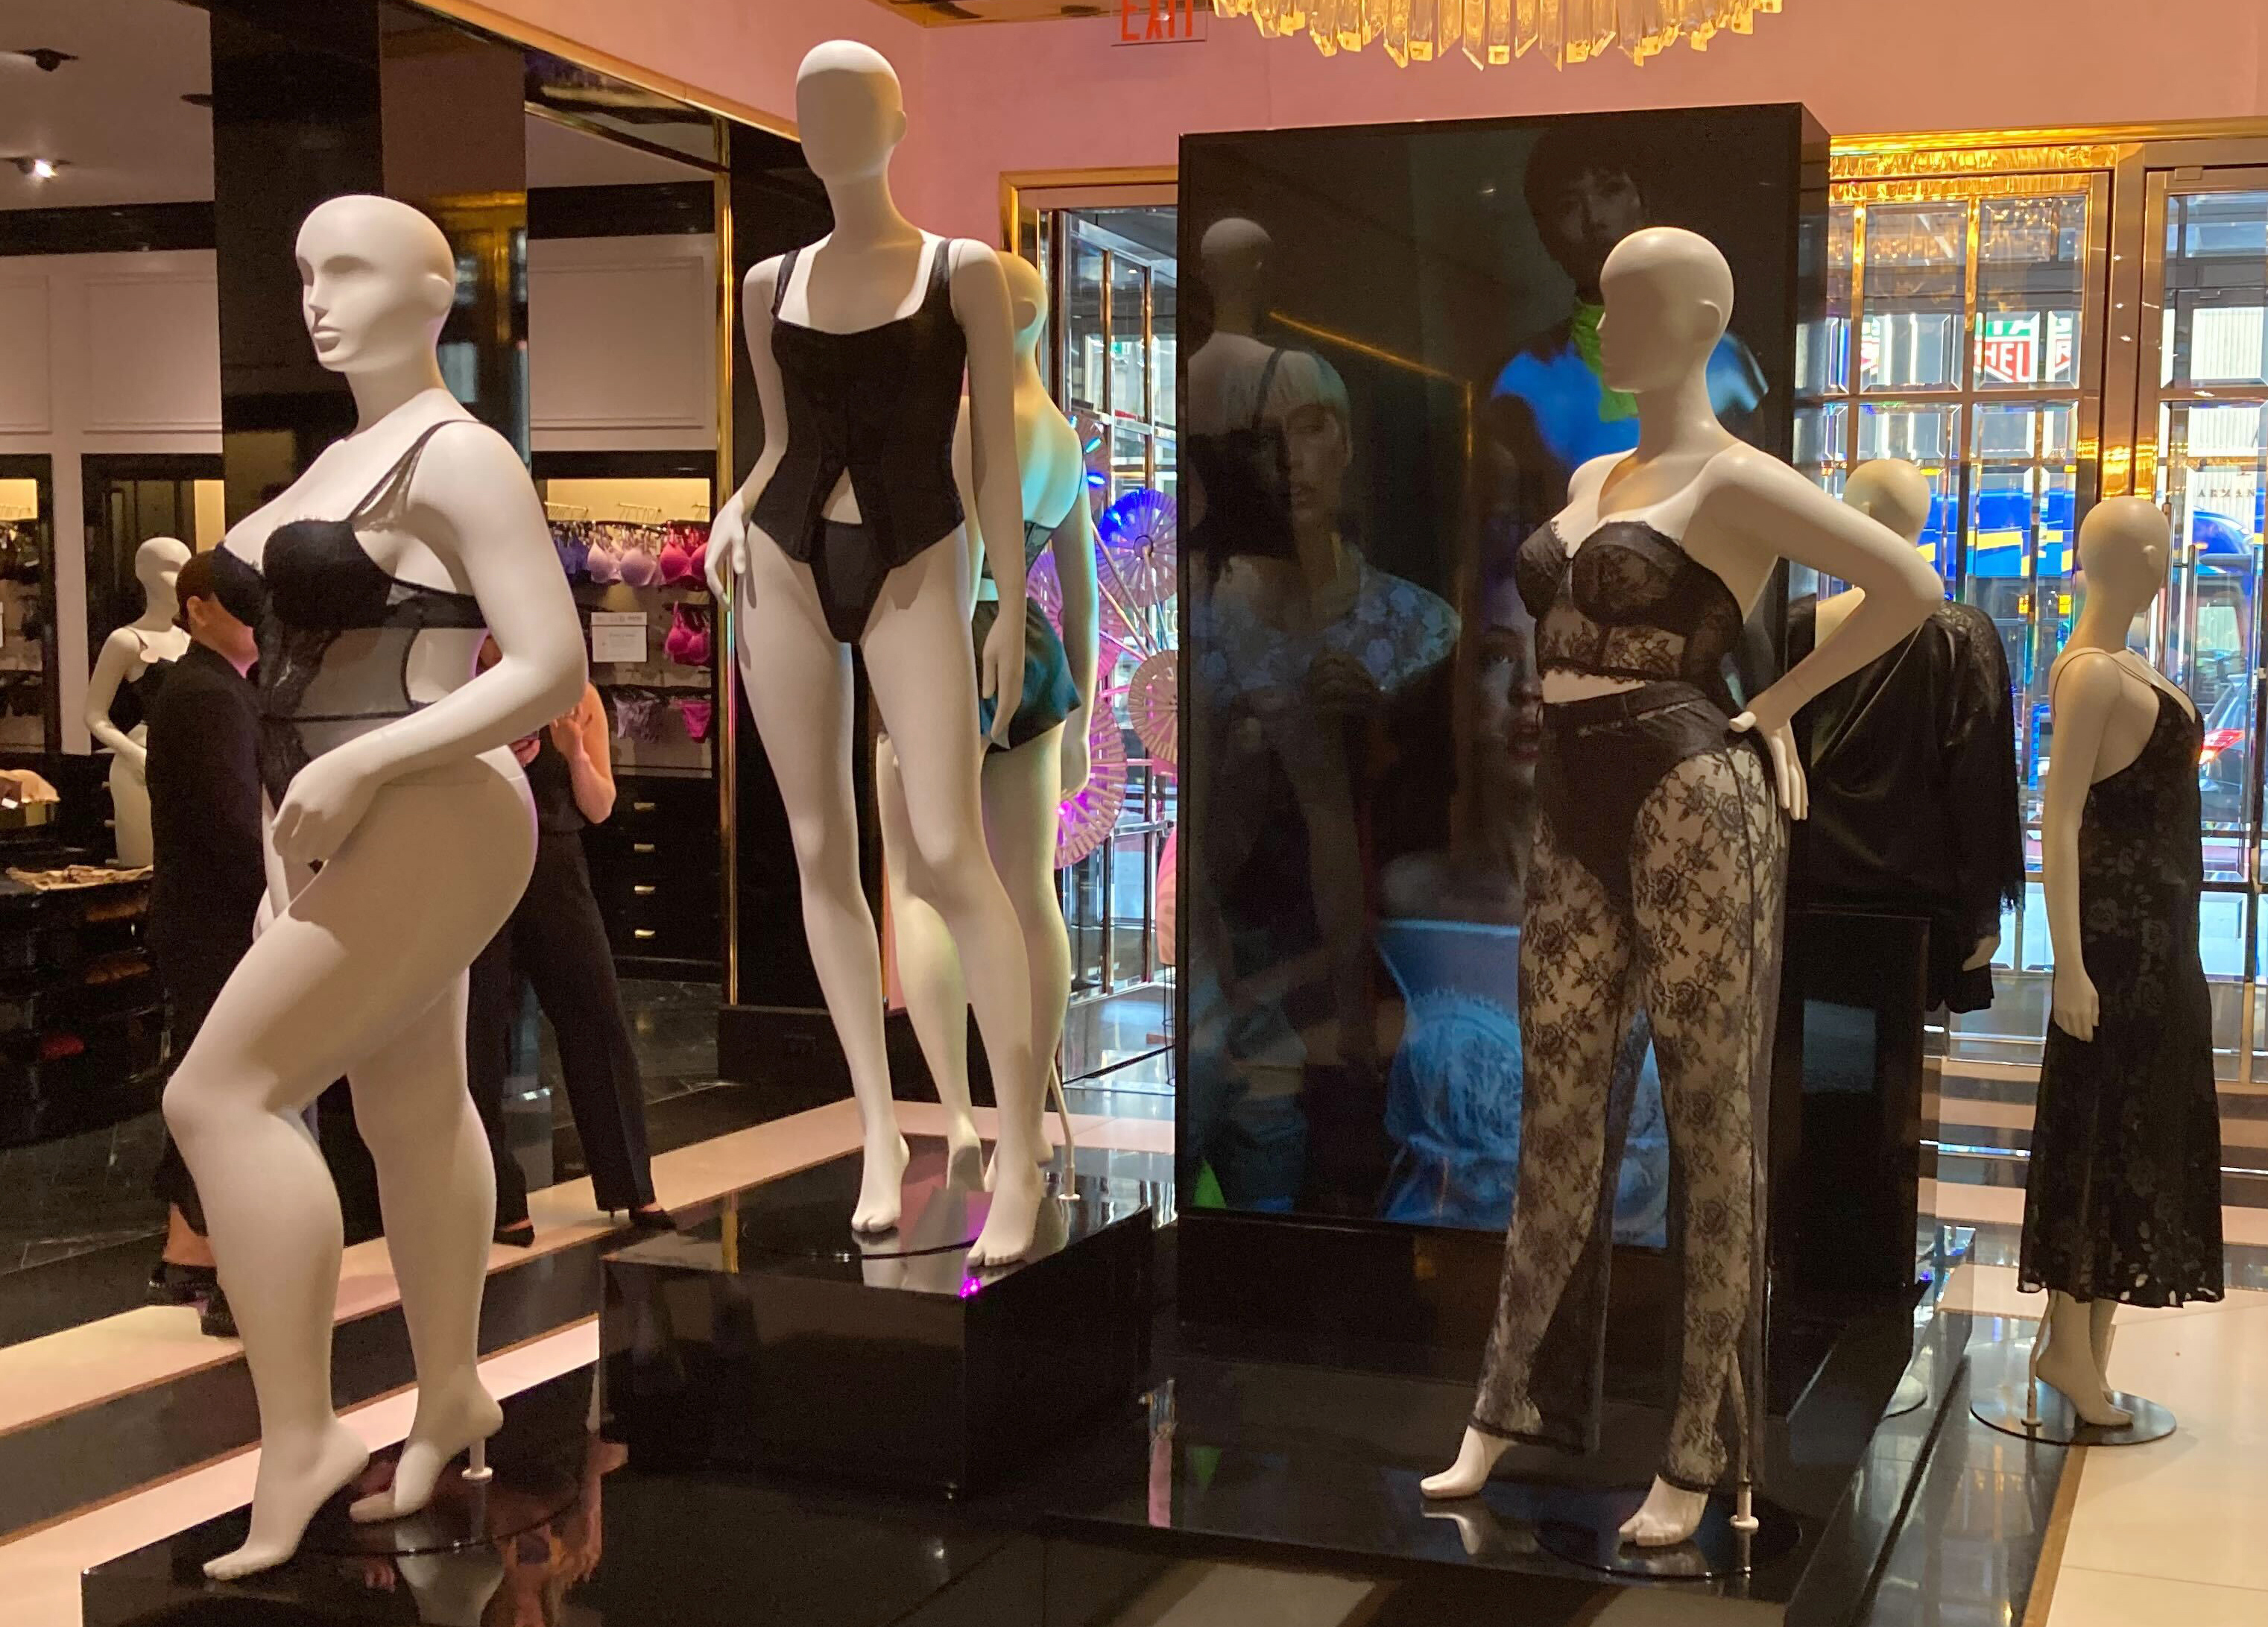 Victoria's Secret Plans To Sell Apparel and Lingerie on  Amidst  Slowing Sales - Retail Bum